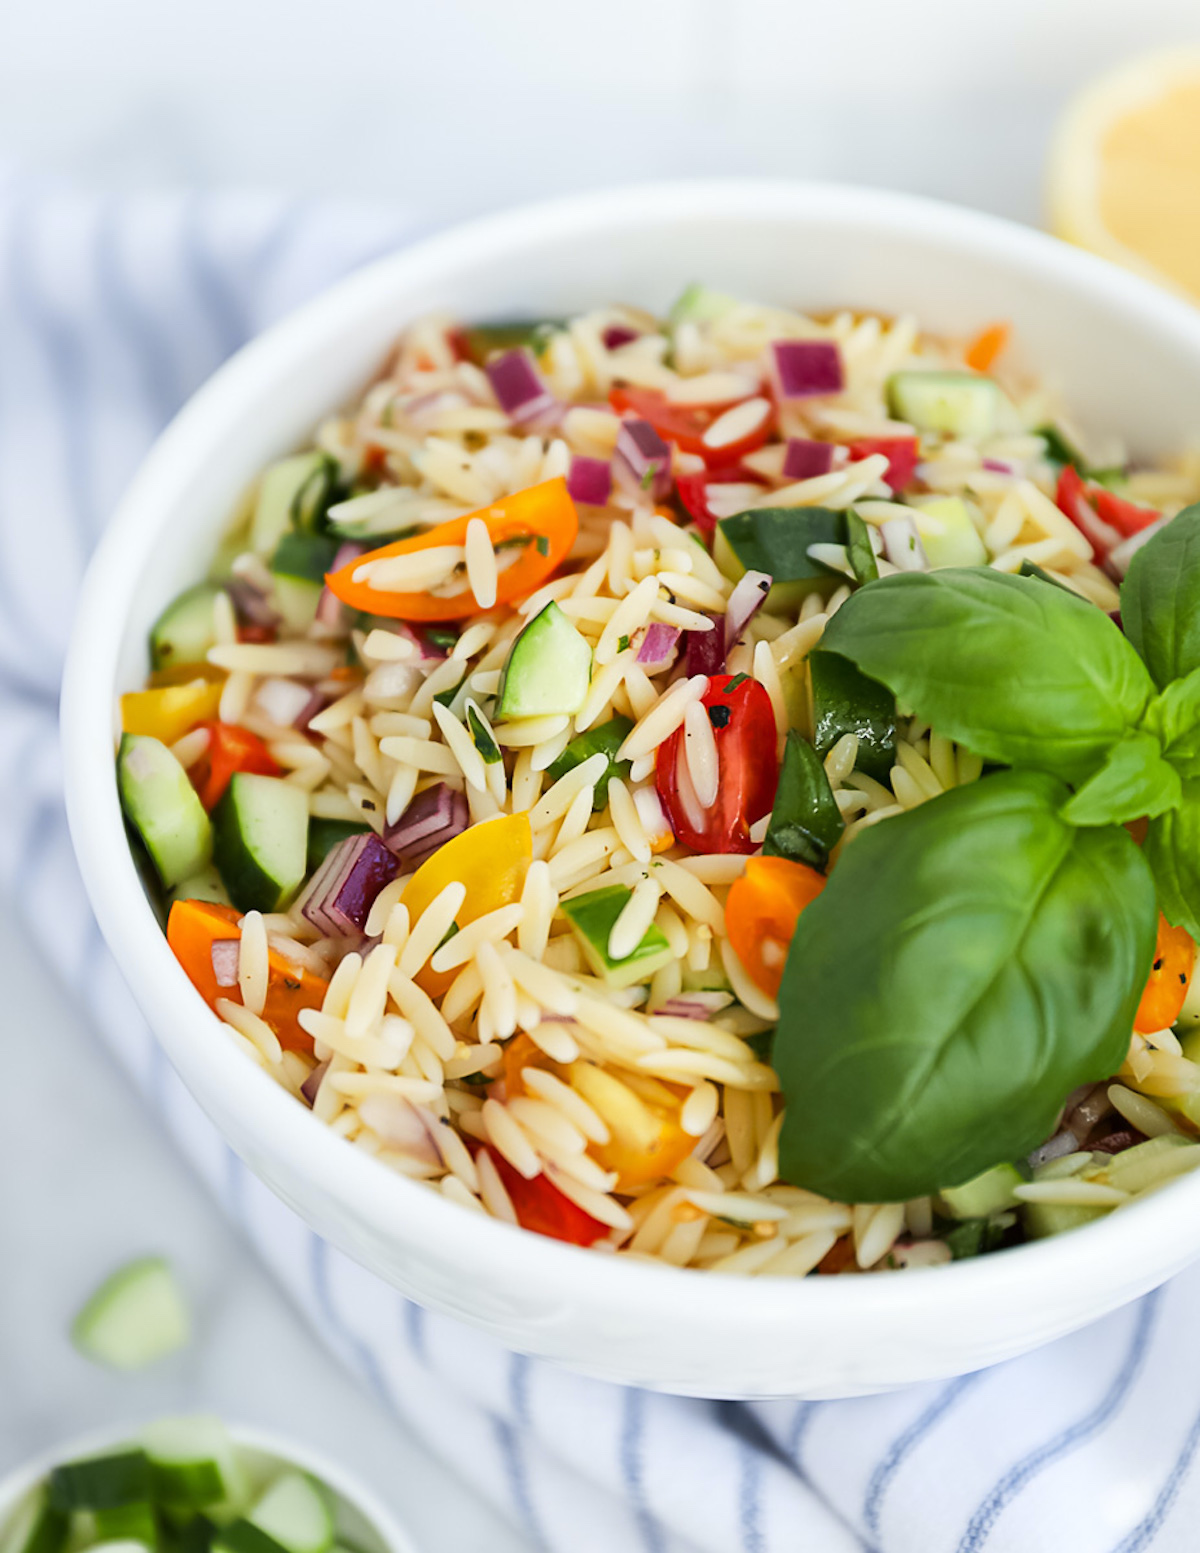 A close-up picture of a bowl filled with orzo salad, tomatoes, cucumbers, onion, and herbs.